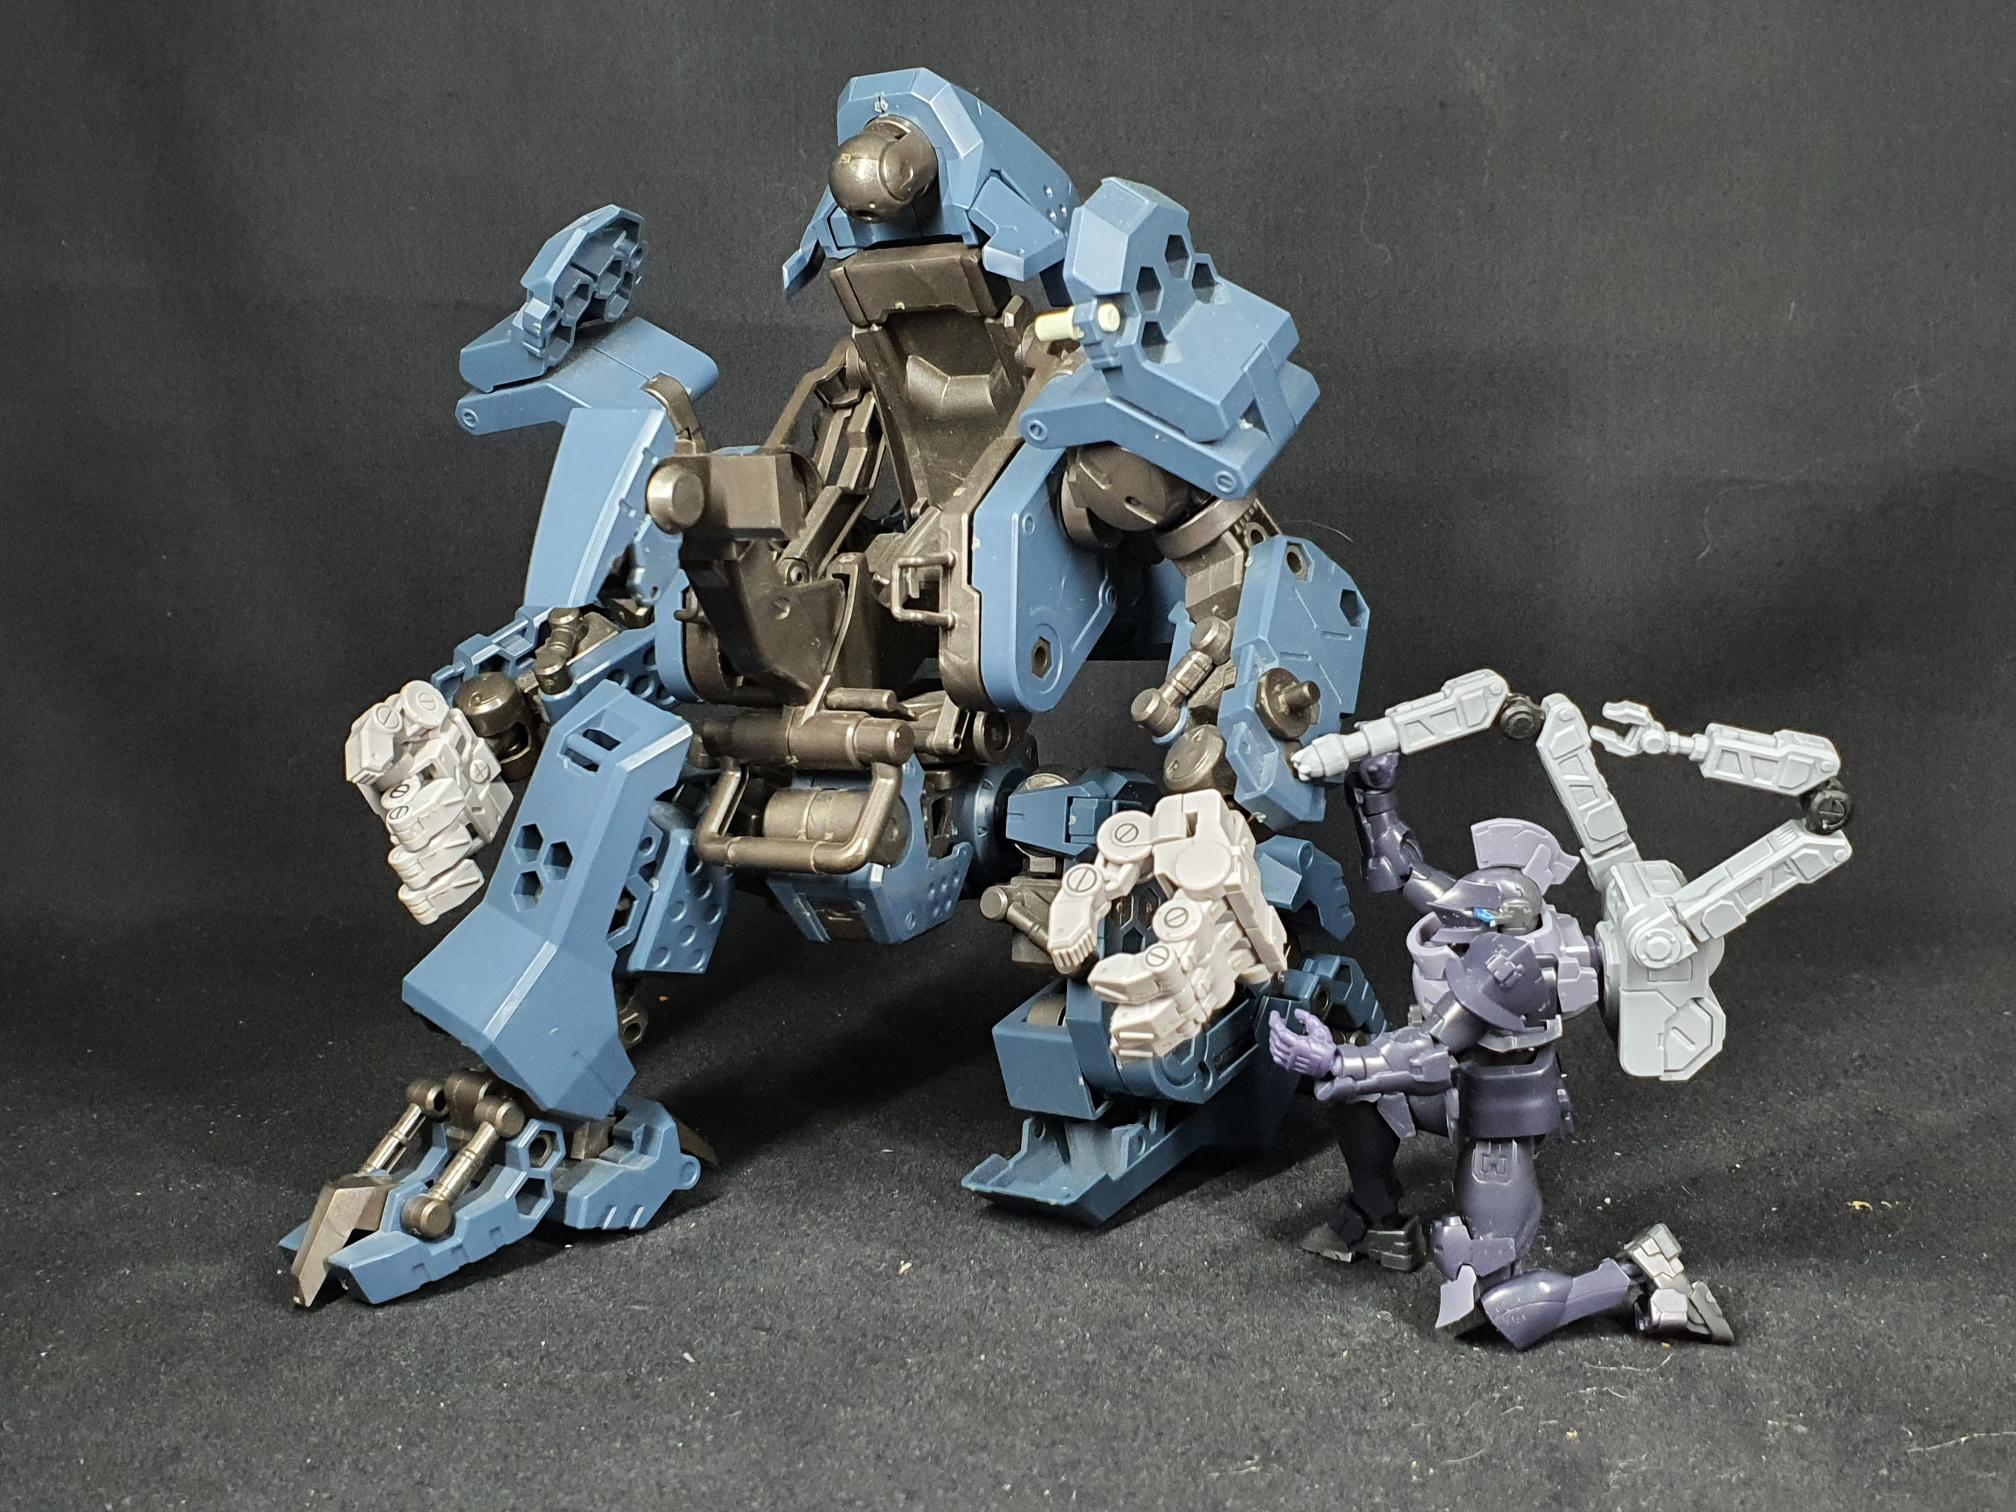 1/100 scale EISENFRONT, 1/24 scale Utility repair backpack